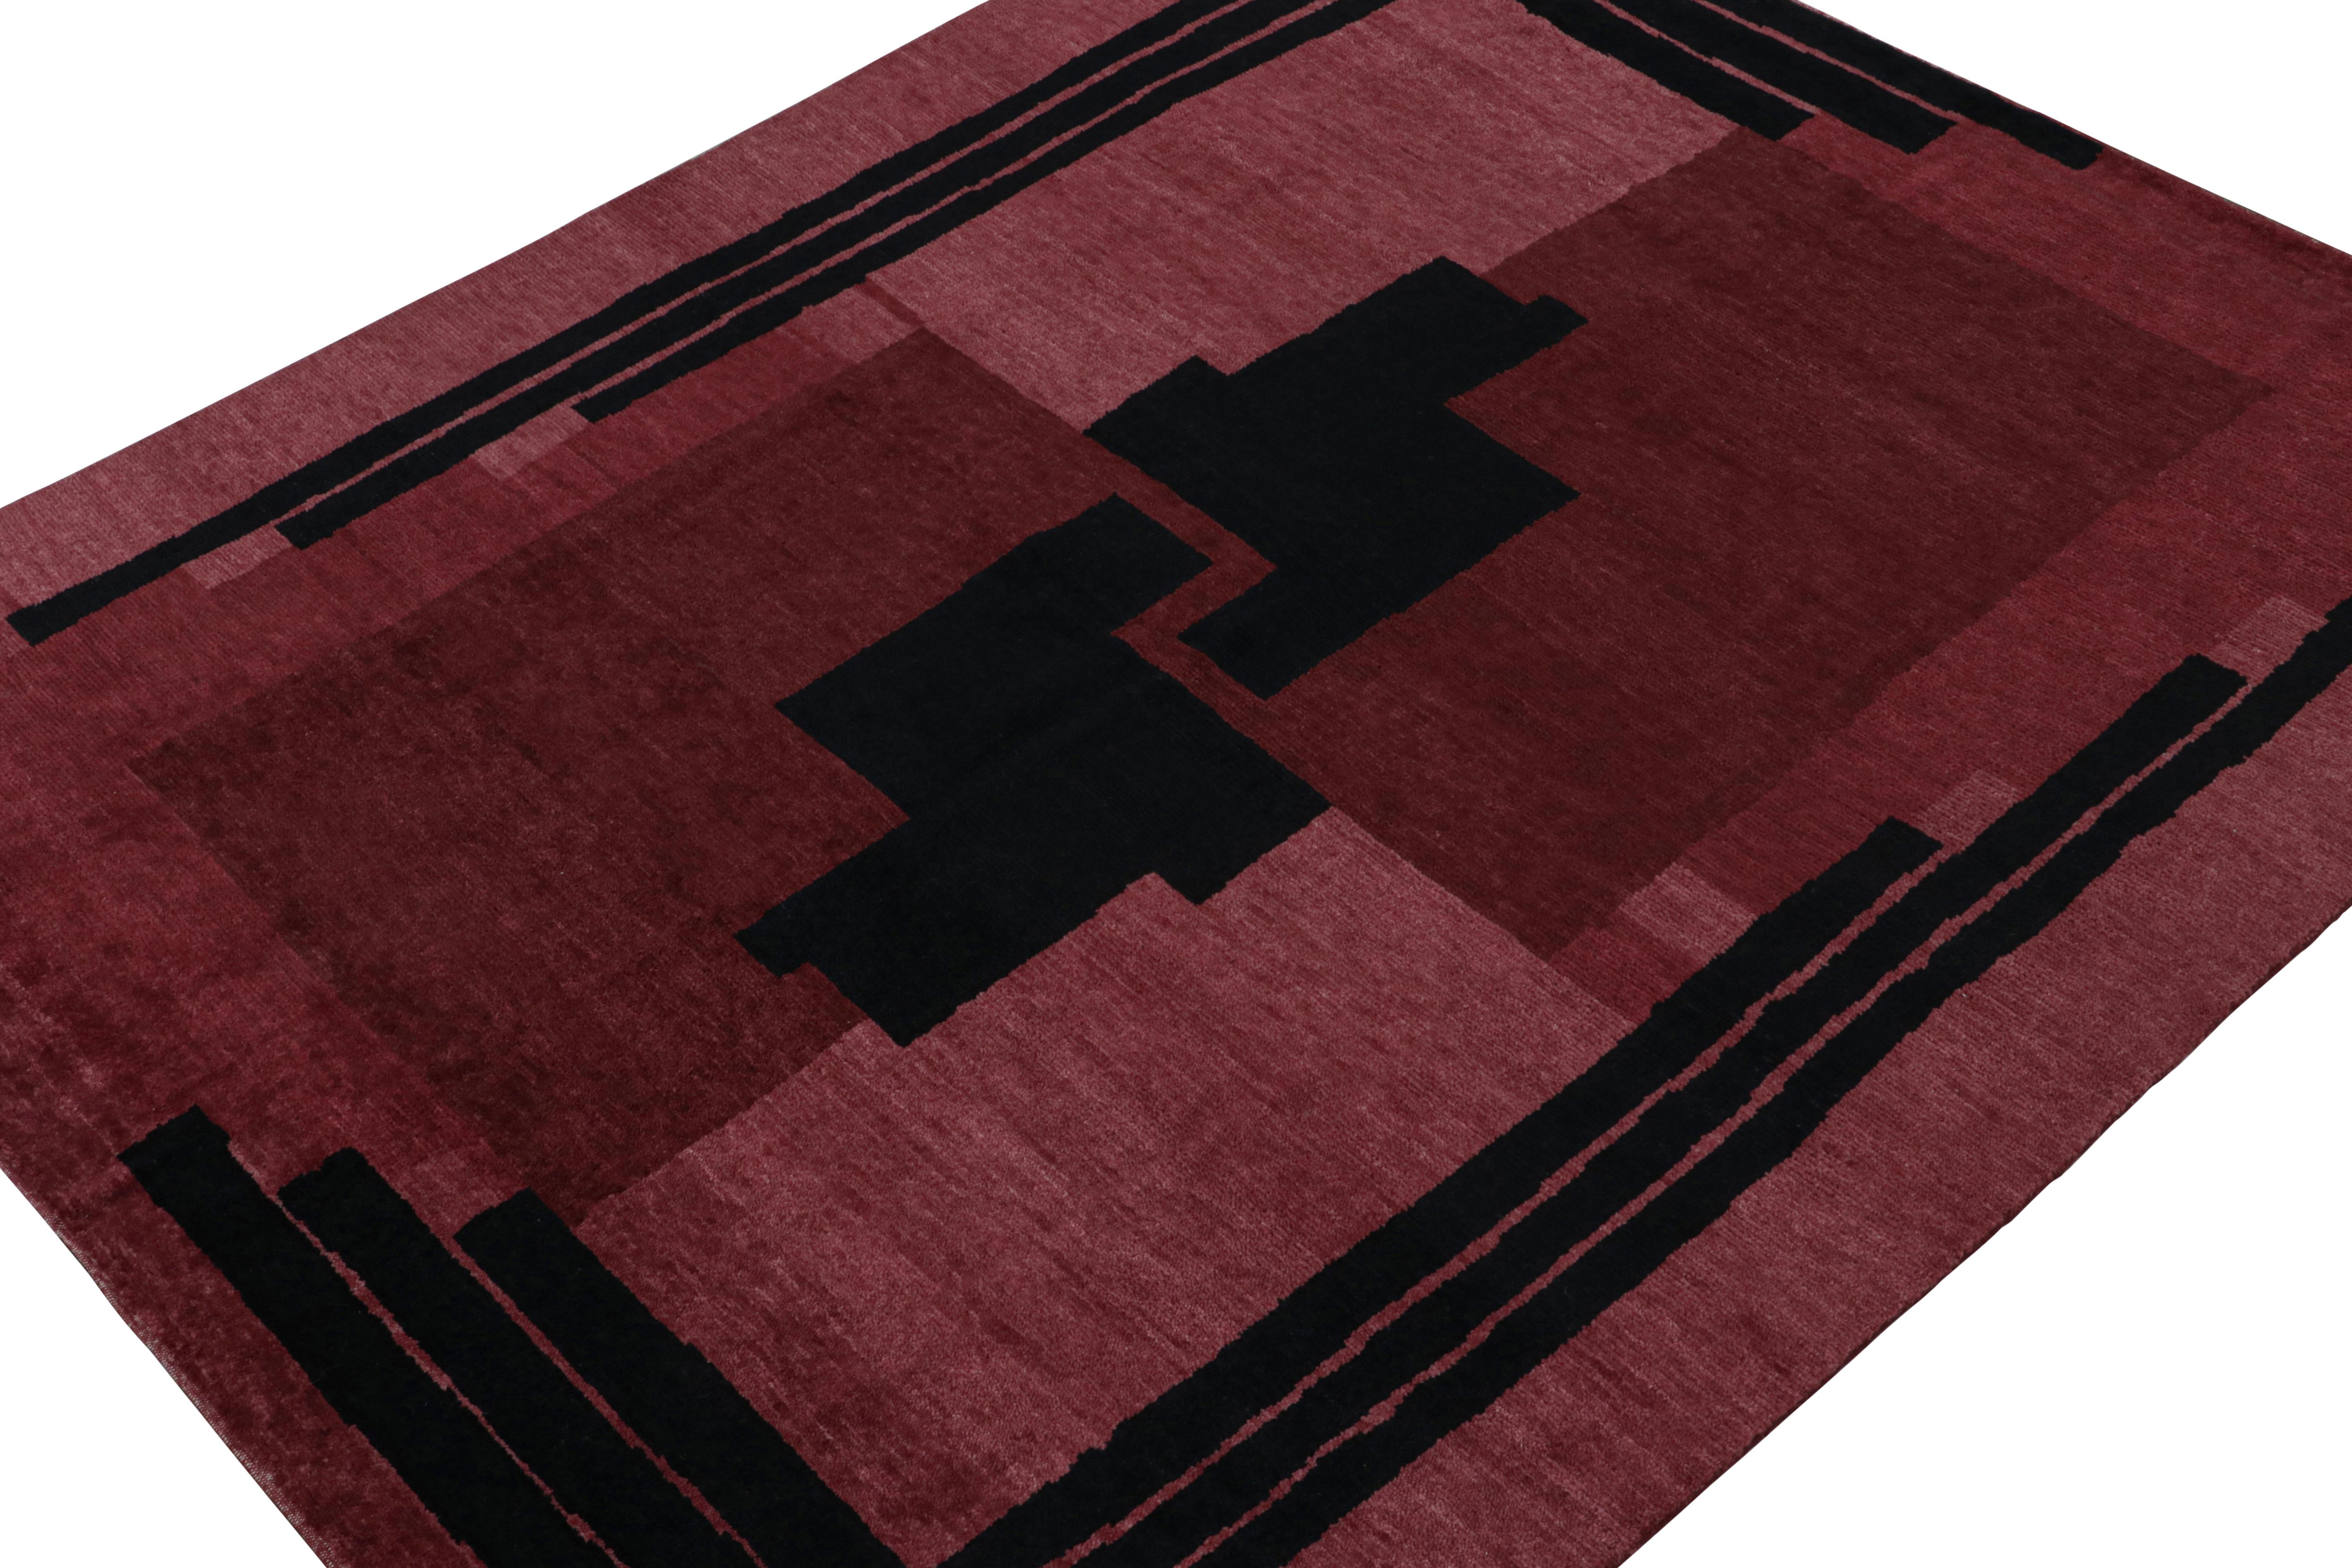 Hand knotted in wool, this 8x10 modern rug is an exciting new addition to the French Art Deco rug collection by Rug & Kilim.

On the design

This piece is inspired by the same European style of the 1920s, and enjoys bordeaux and burgundy red field